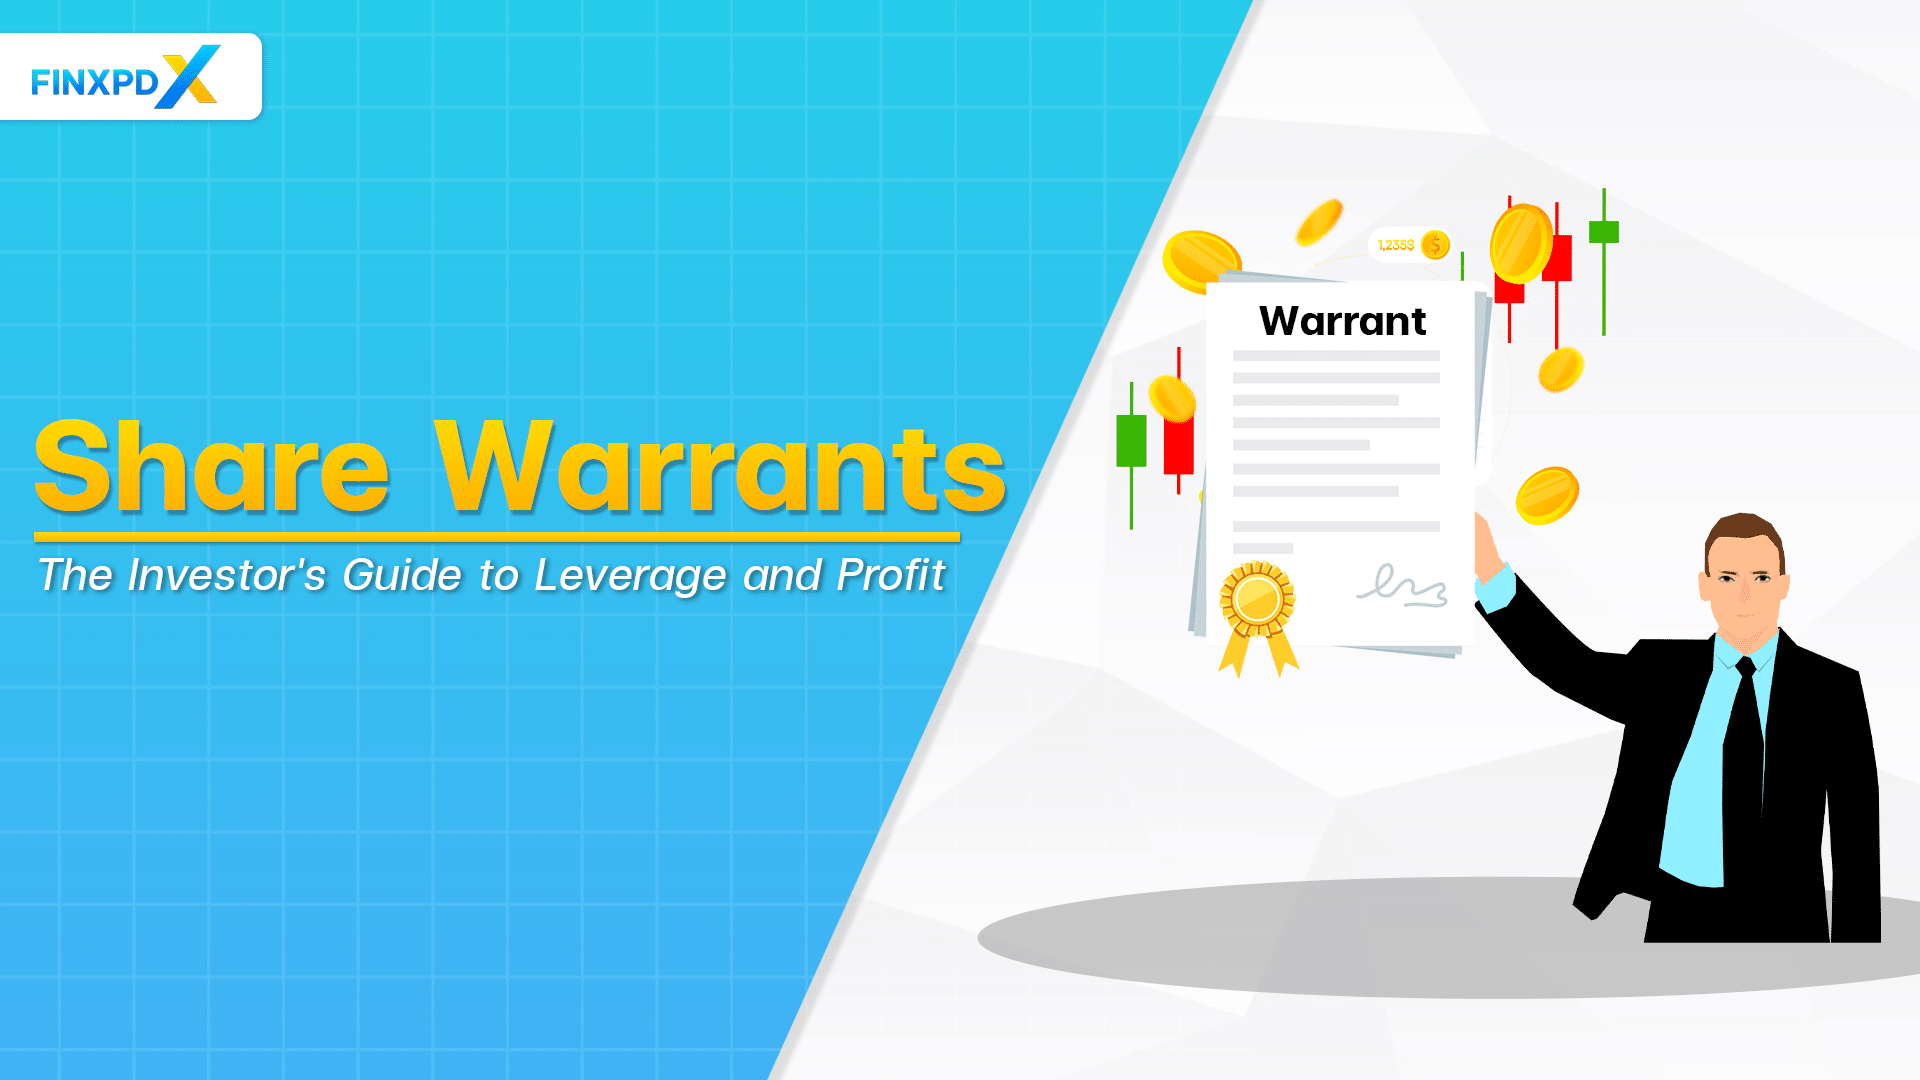 Share Warrants: The Investor's Guide to Leverage and Profit